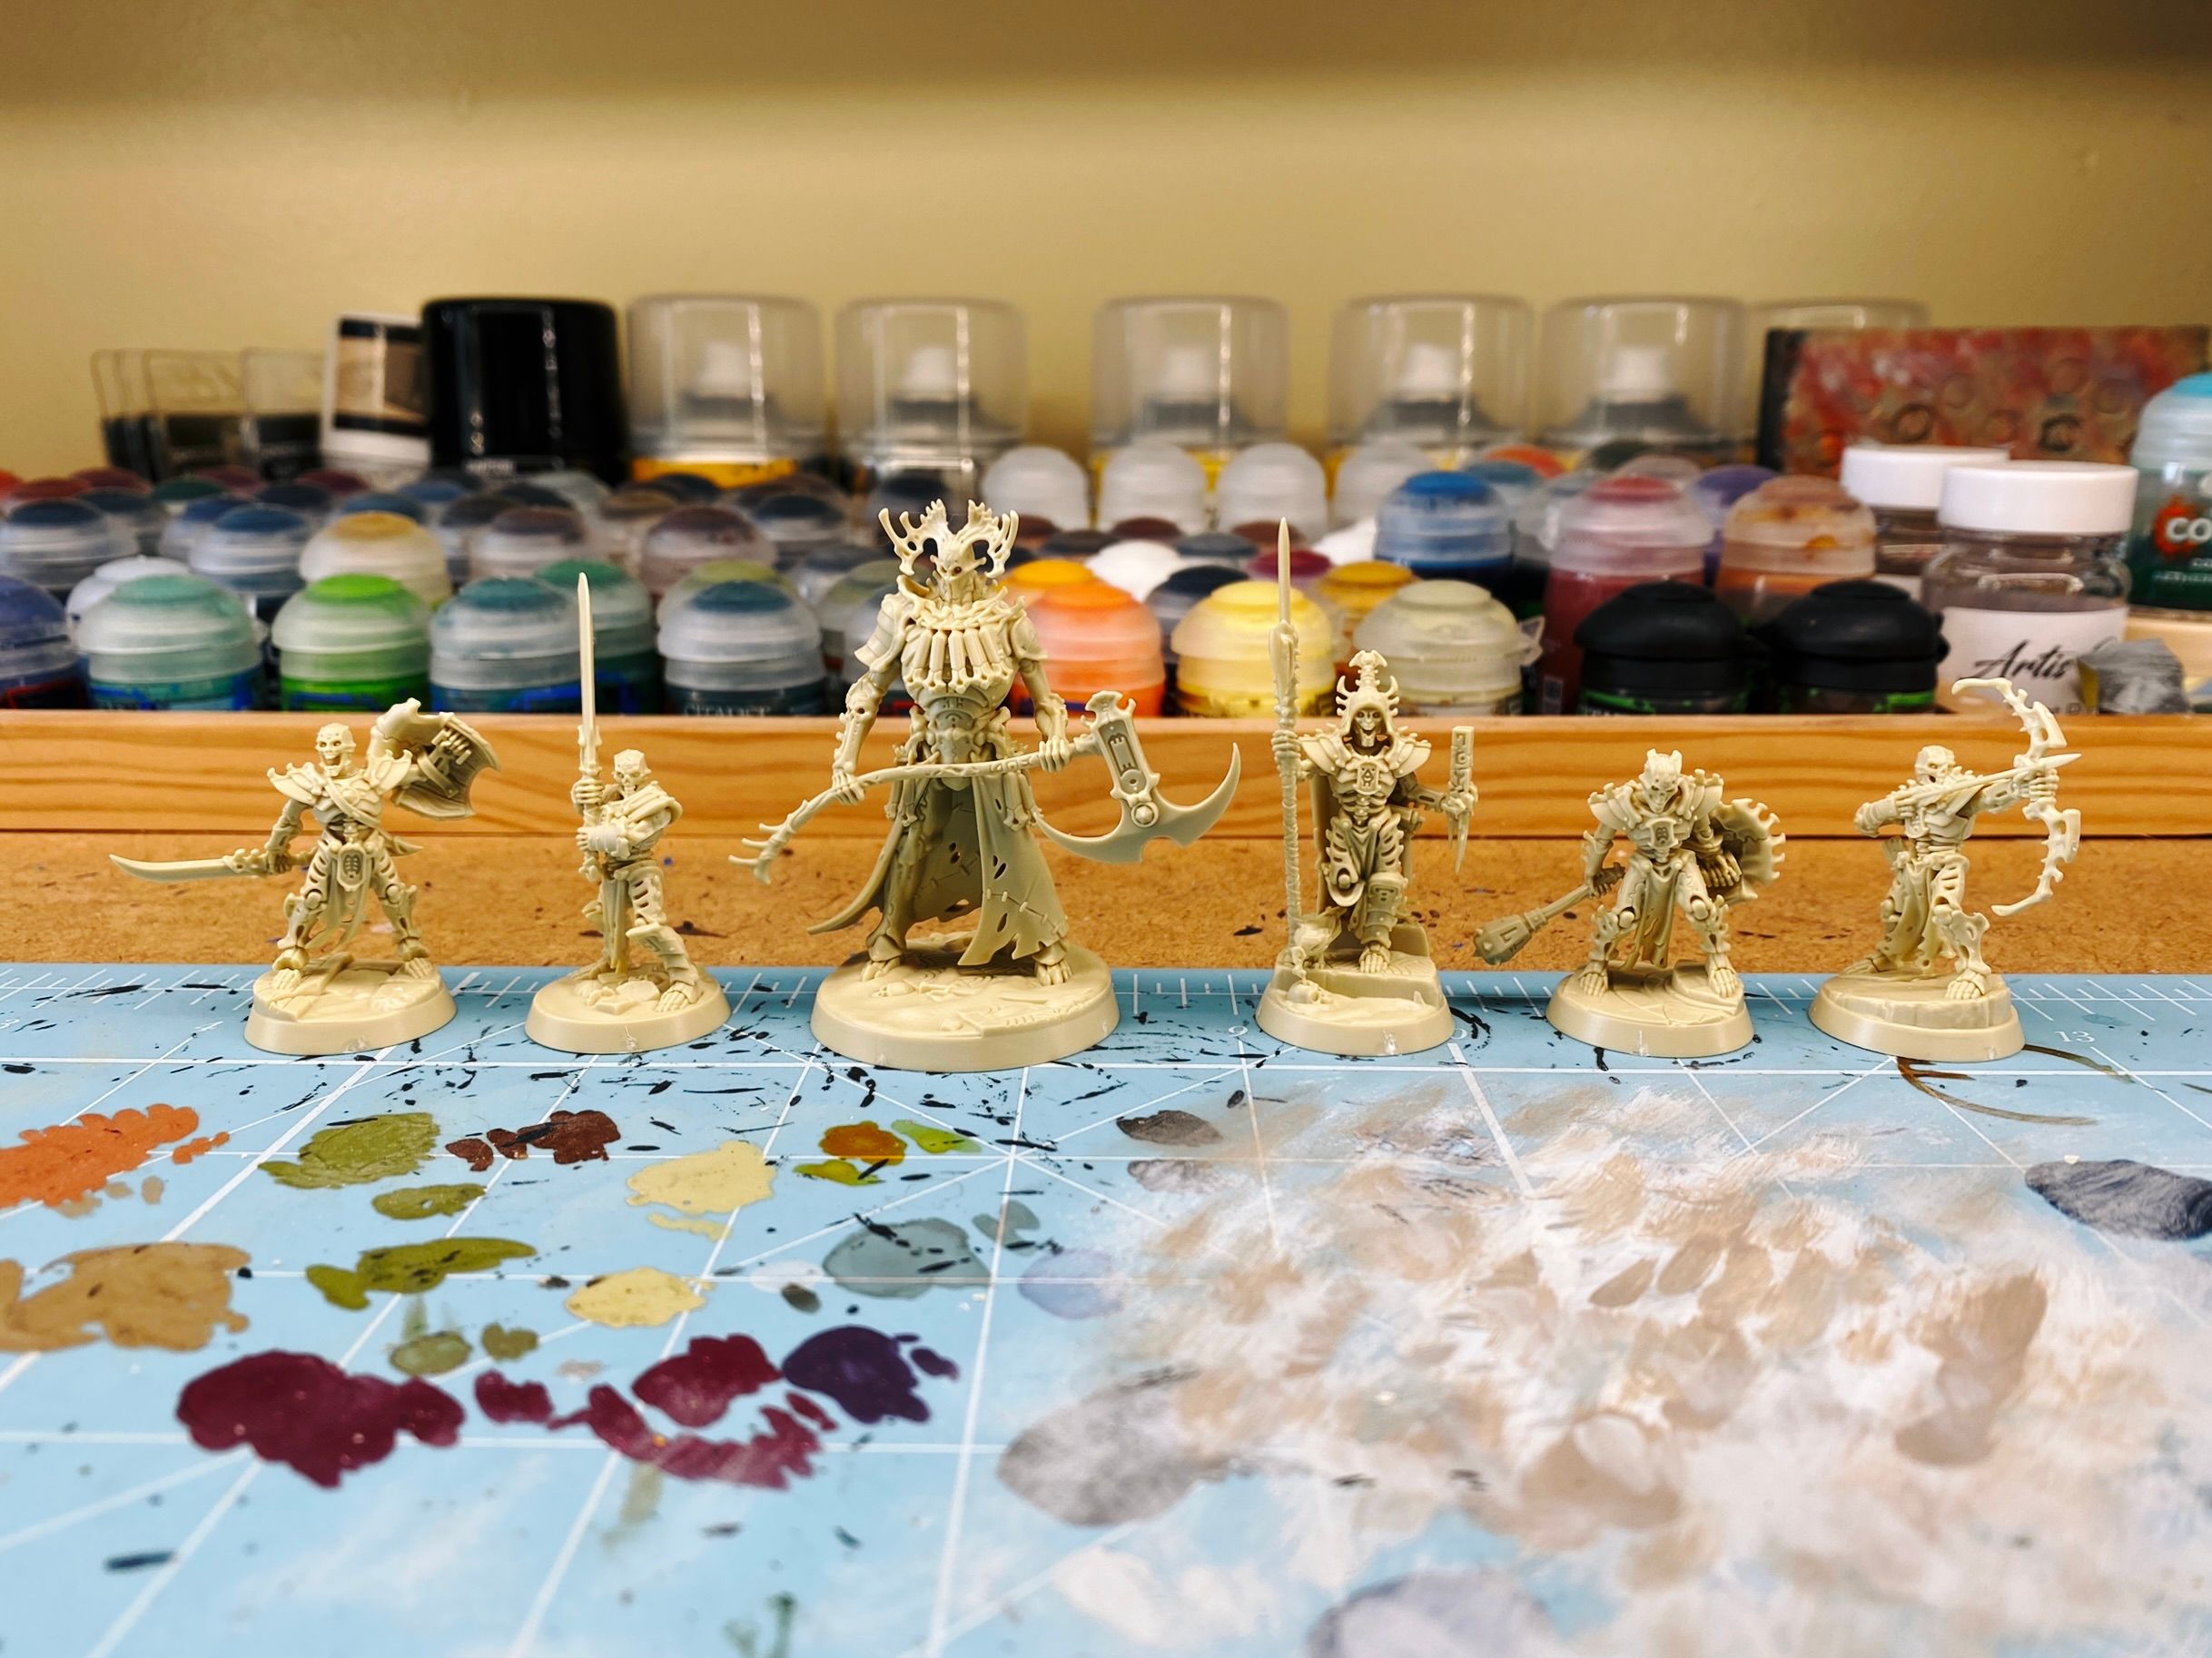 A photo of the Kainan's Reapers warband assembled, in bone-coloured plastic. Six miniatures, all skeletons. Four are warriors holding various weapons, one has a big staff and is weaing an elaborate headdress, and the last is a HUGE armoured fellow towering over the rest, holding a double-bladed scythe.